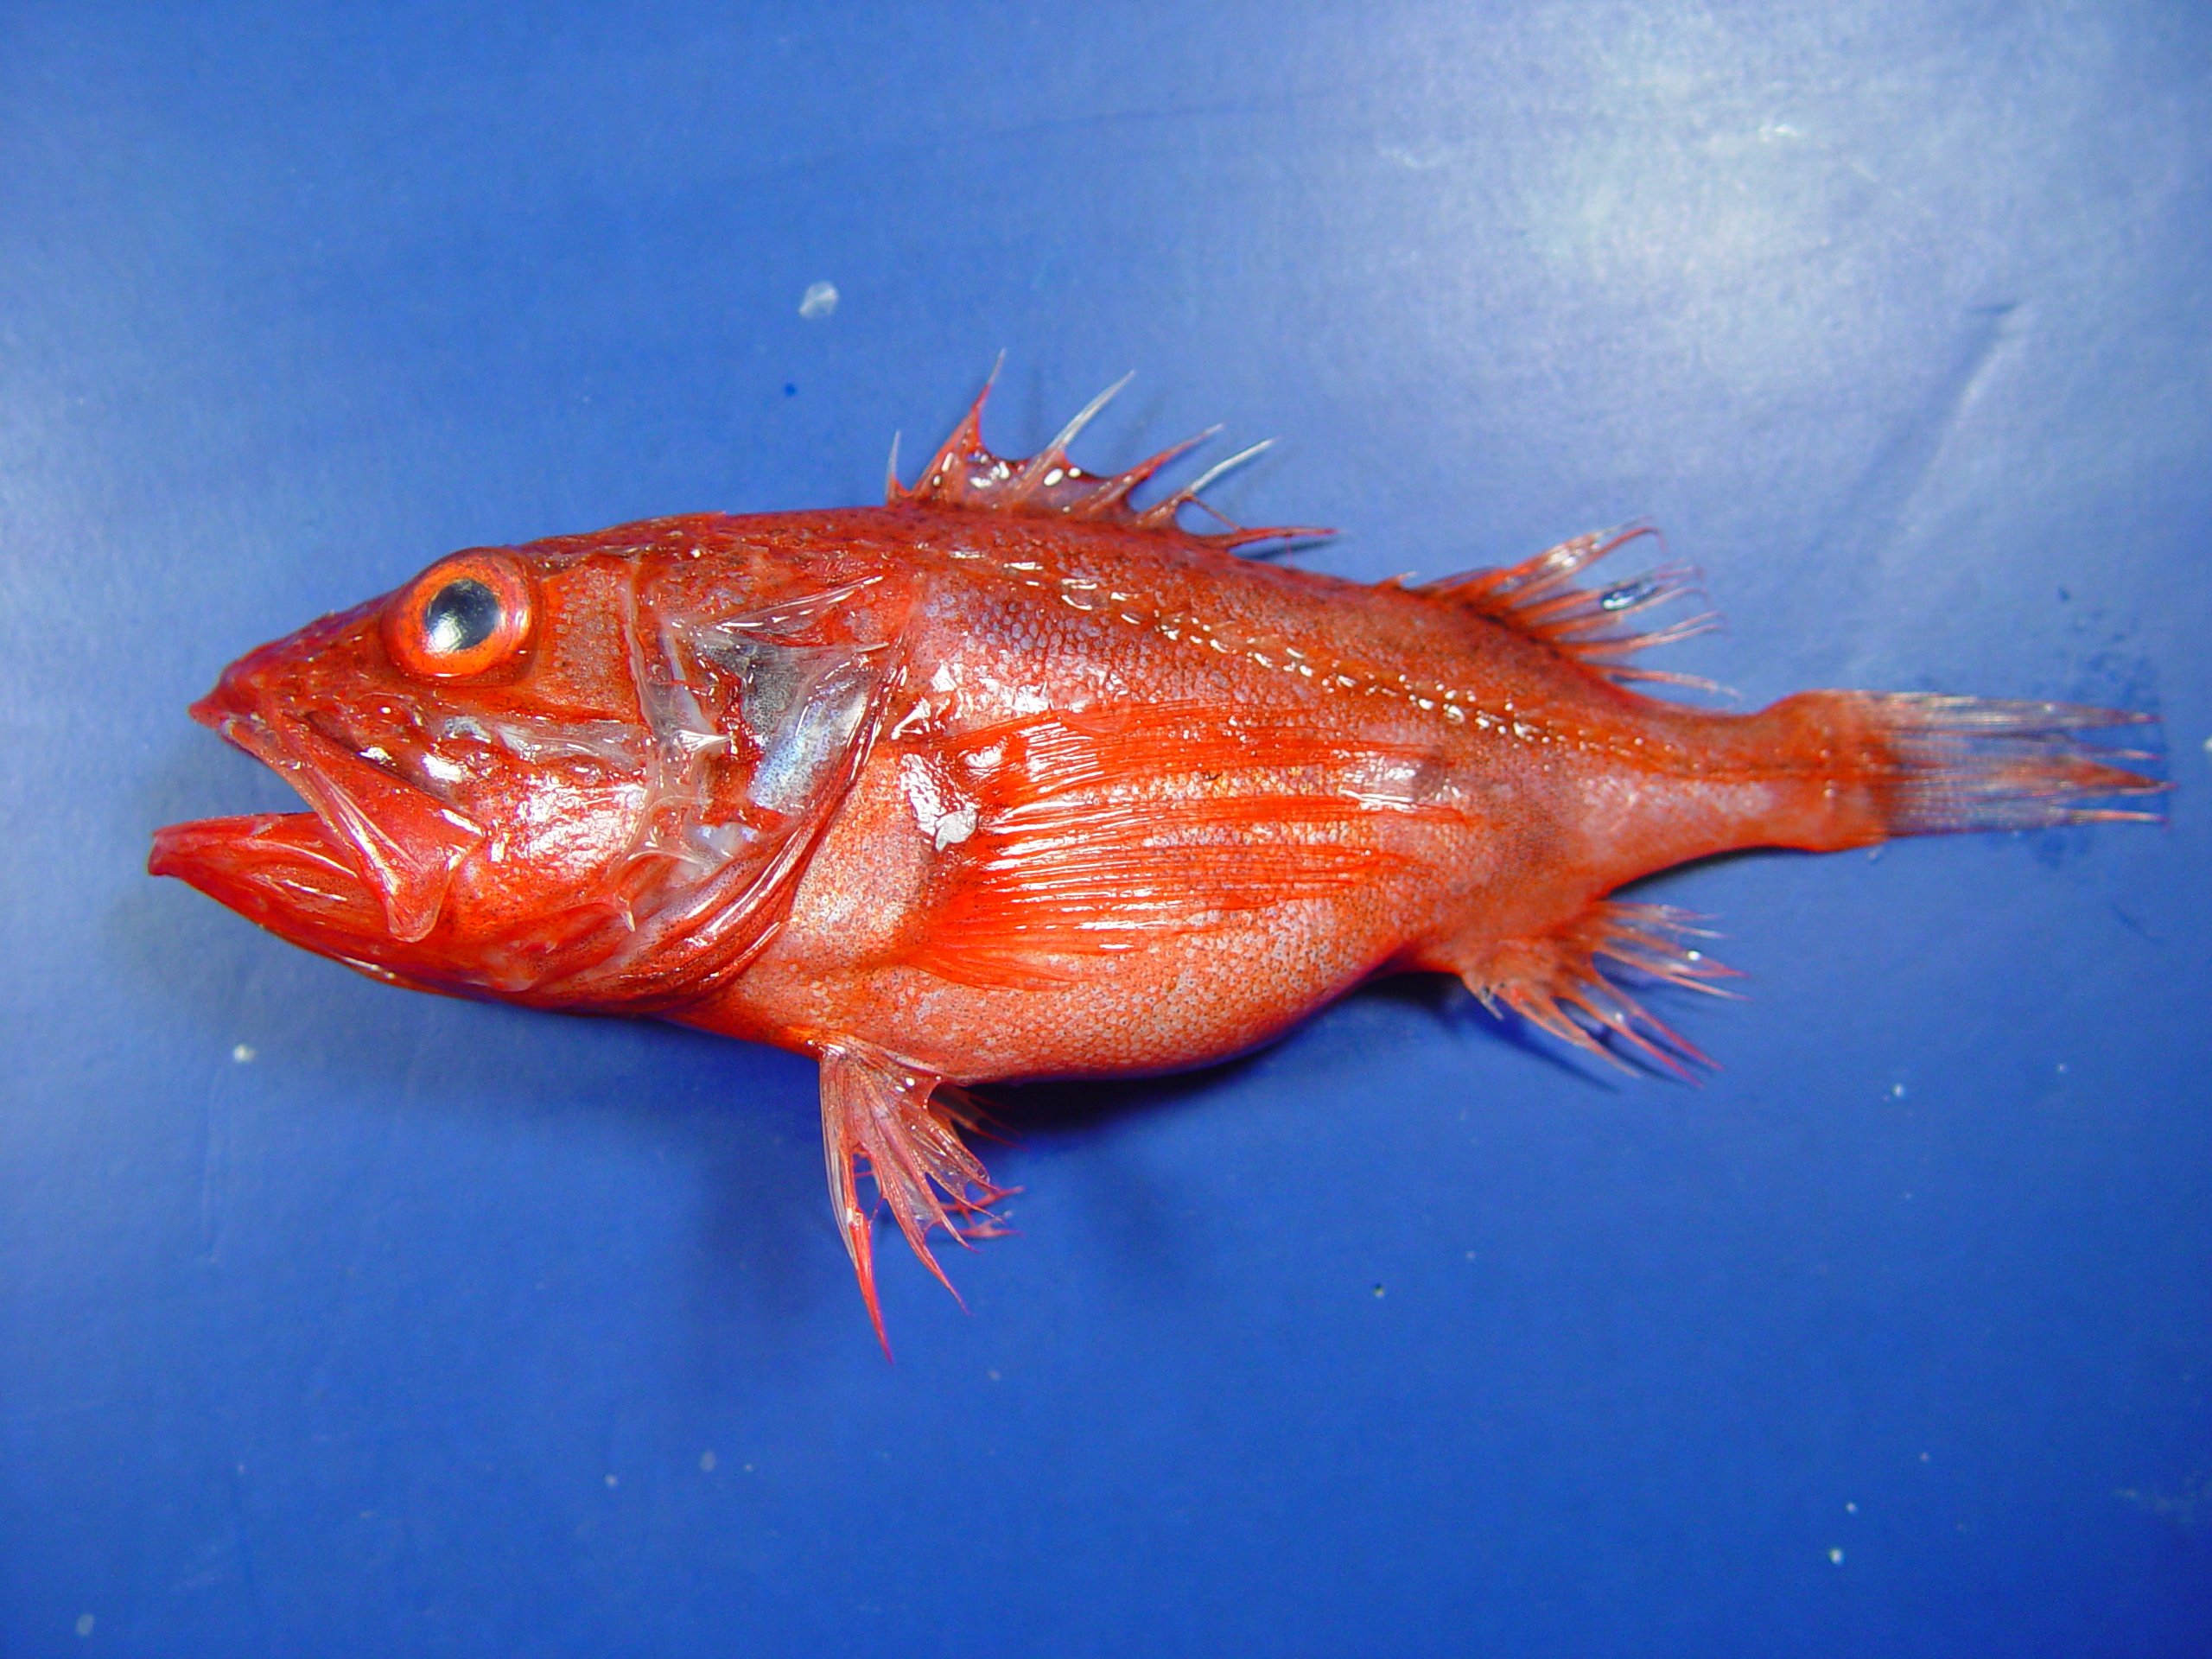 image of Setarches guentheri (Channeled rockfish)